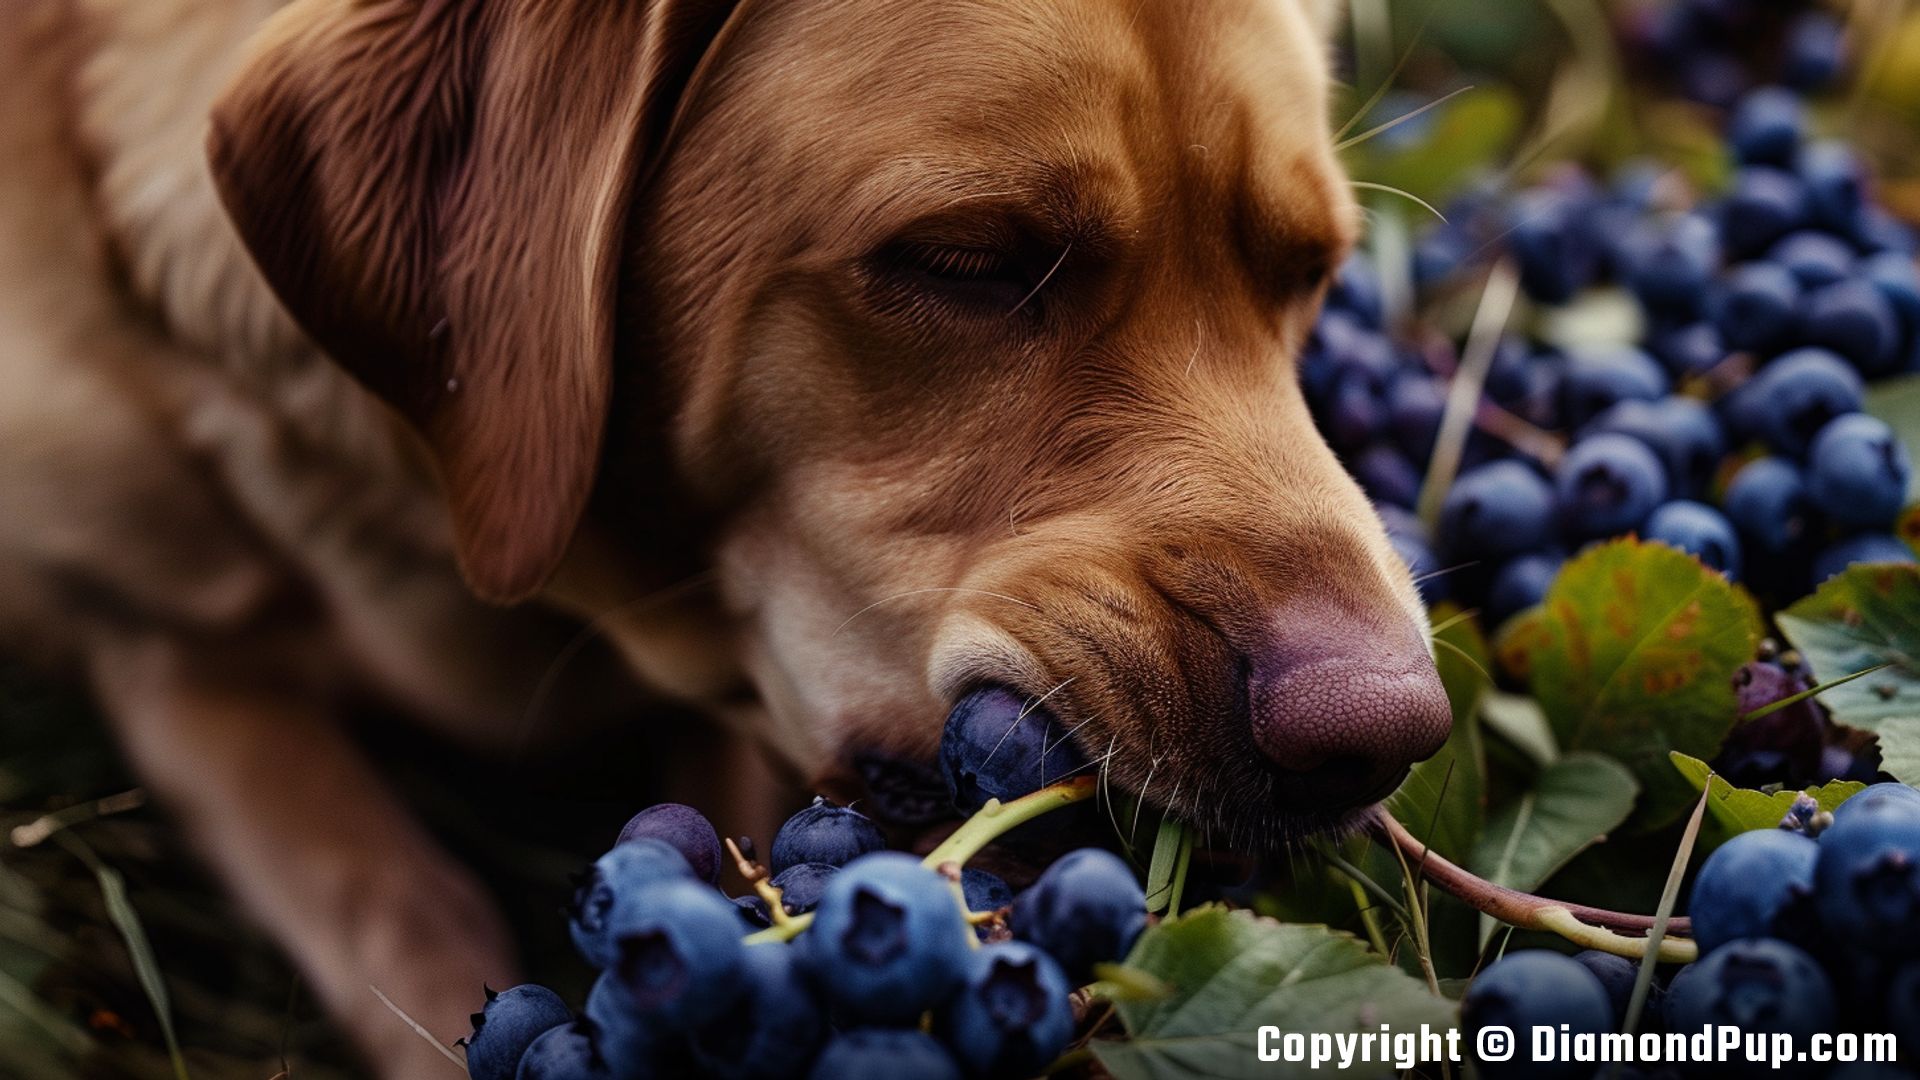 Image of a Cute Labrador Snacking on Blueberries